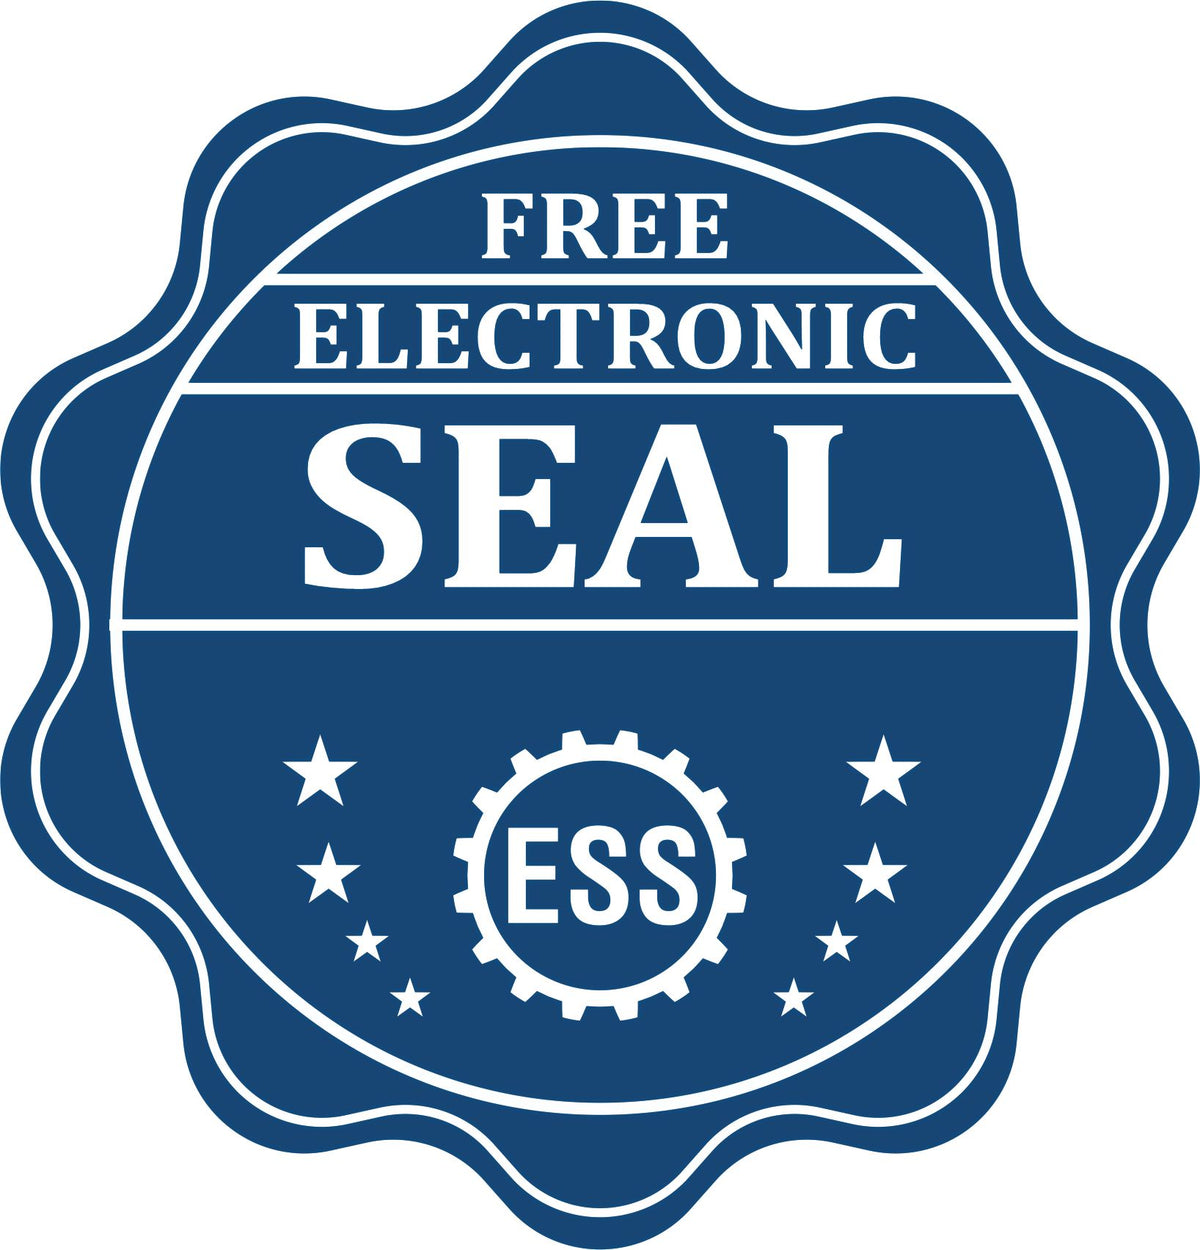 A badge showing a free electronic seal for the MaxLight Premium Pre-Inked South Dakota Rectangular Notarial Stamp with stars and the ESS gear on the emblem.